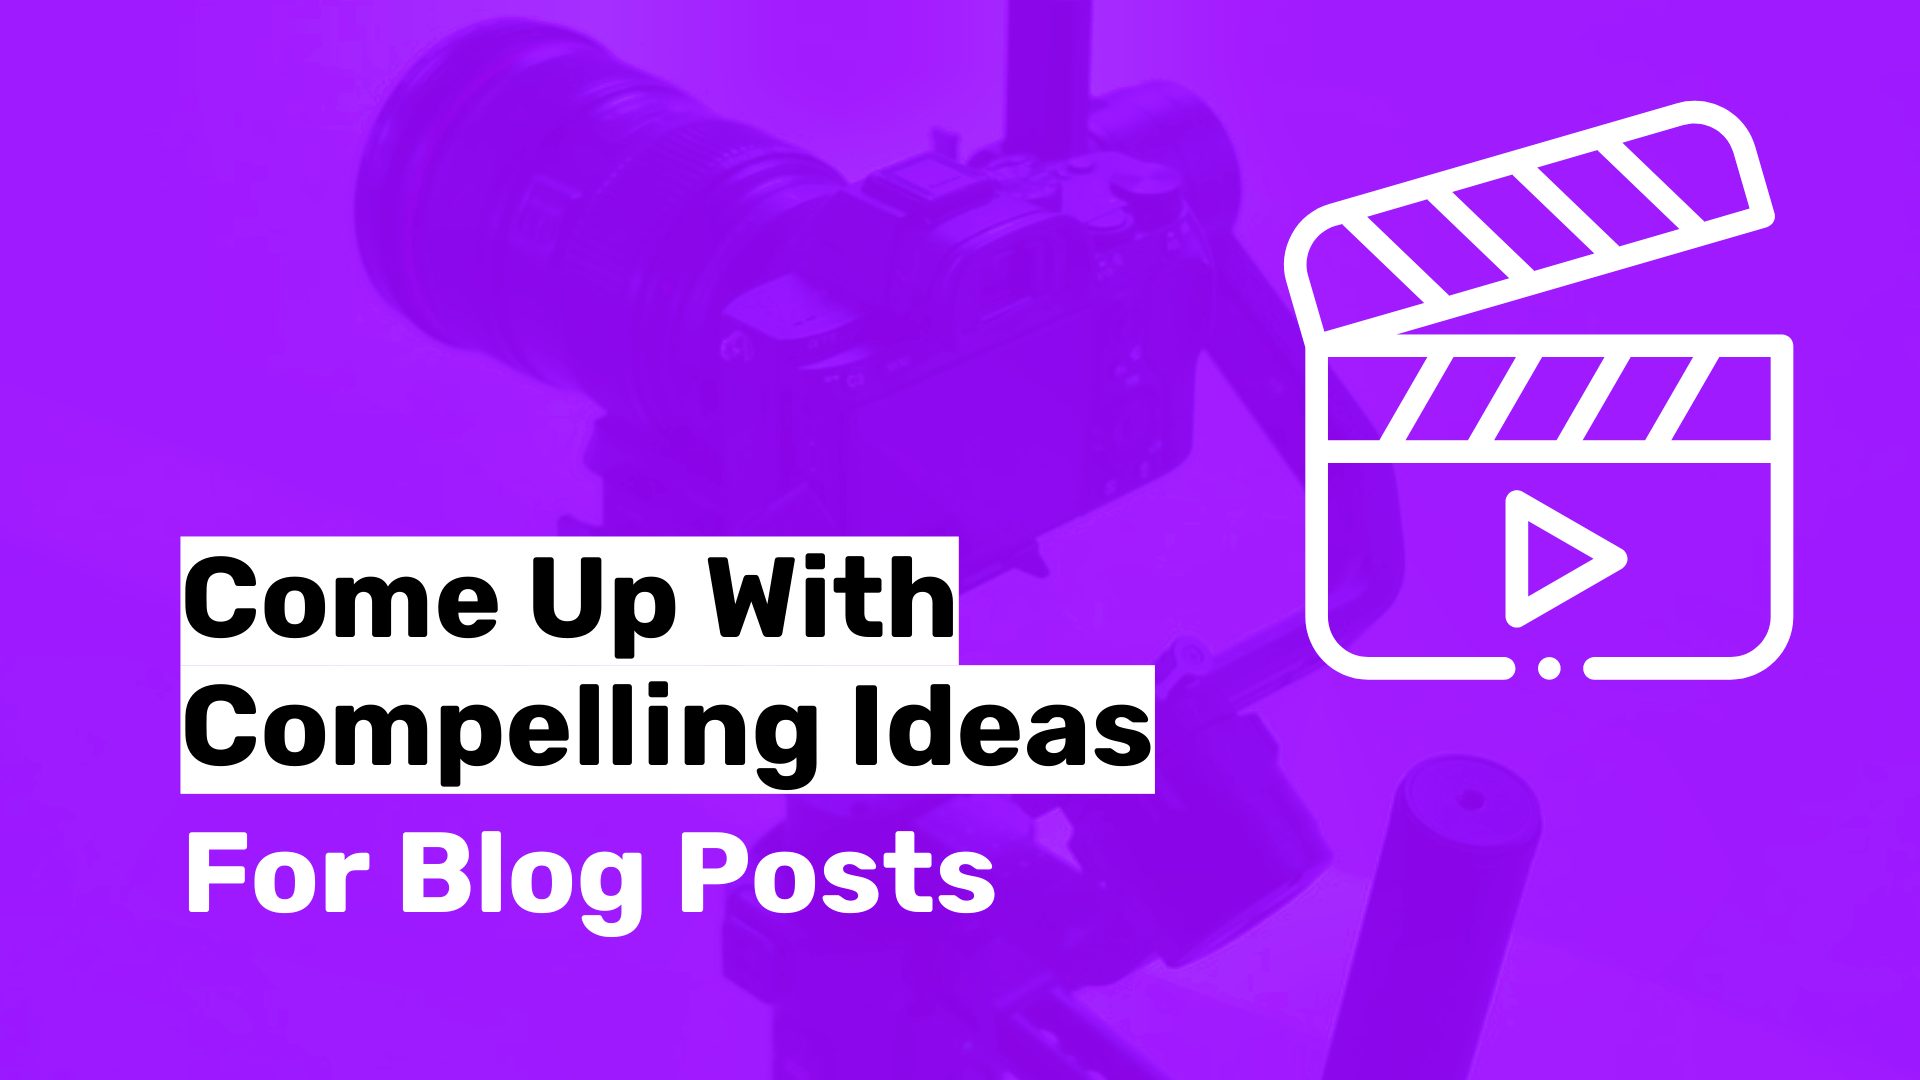 Come up with Compelling Ideas for Blog Posts